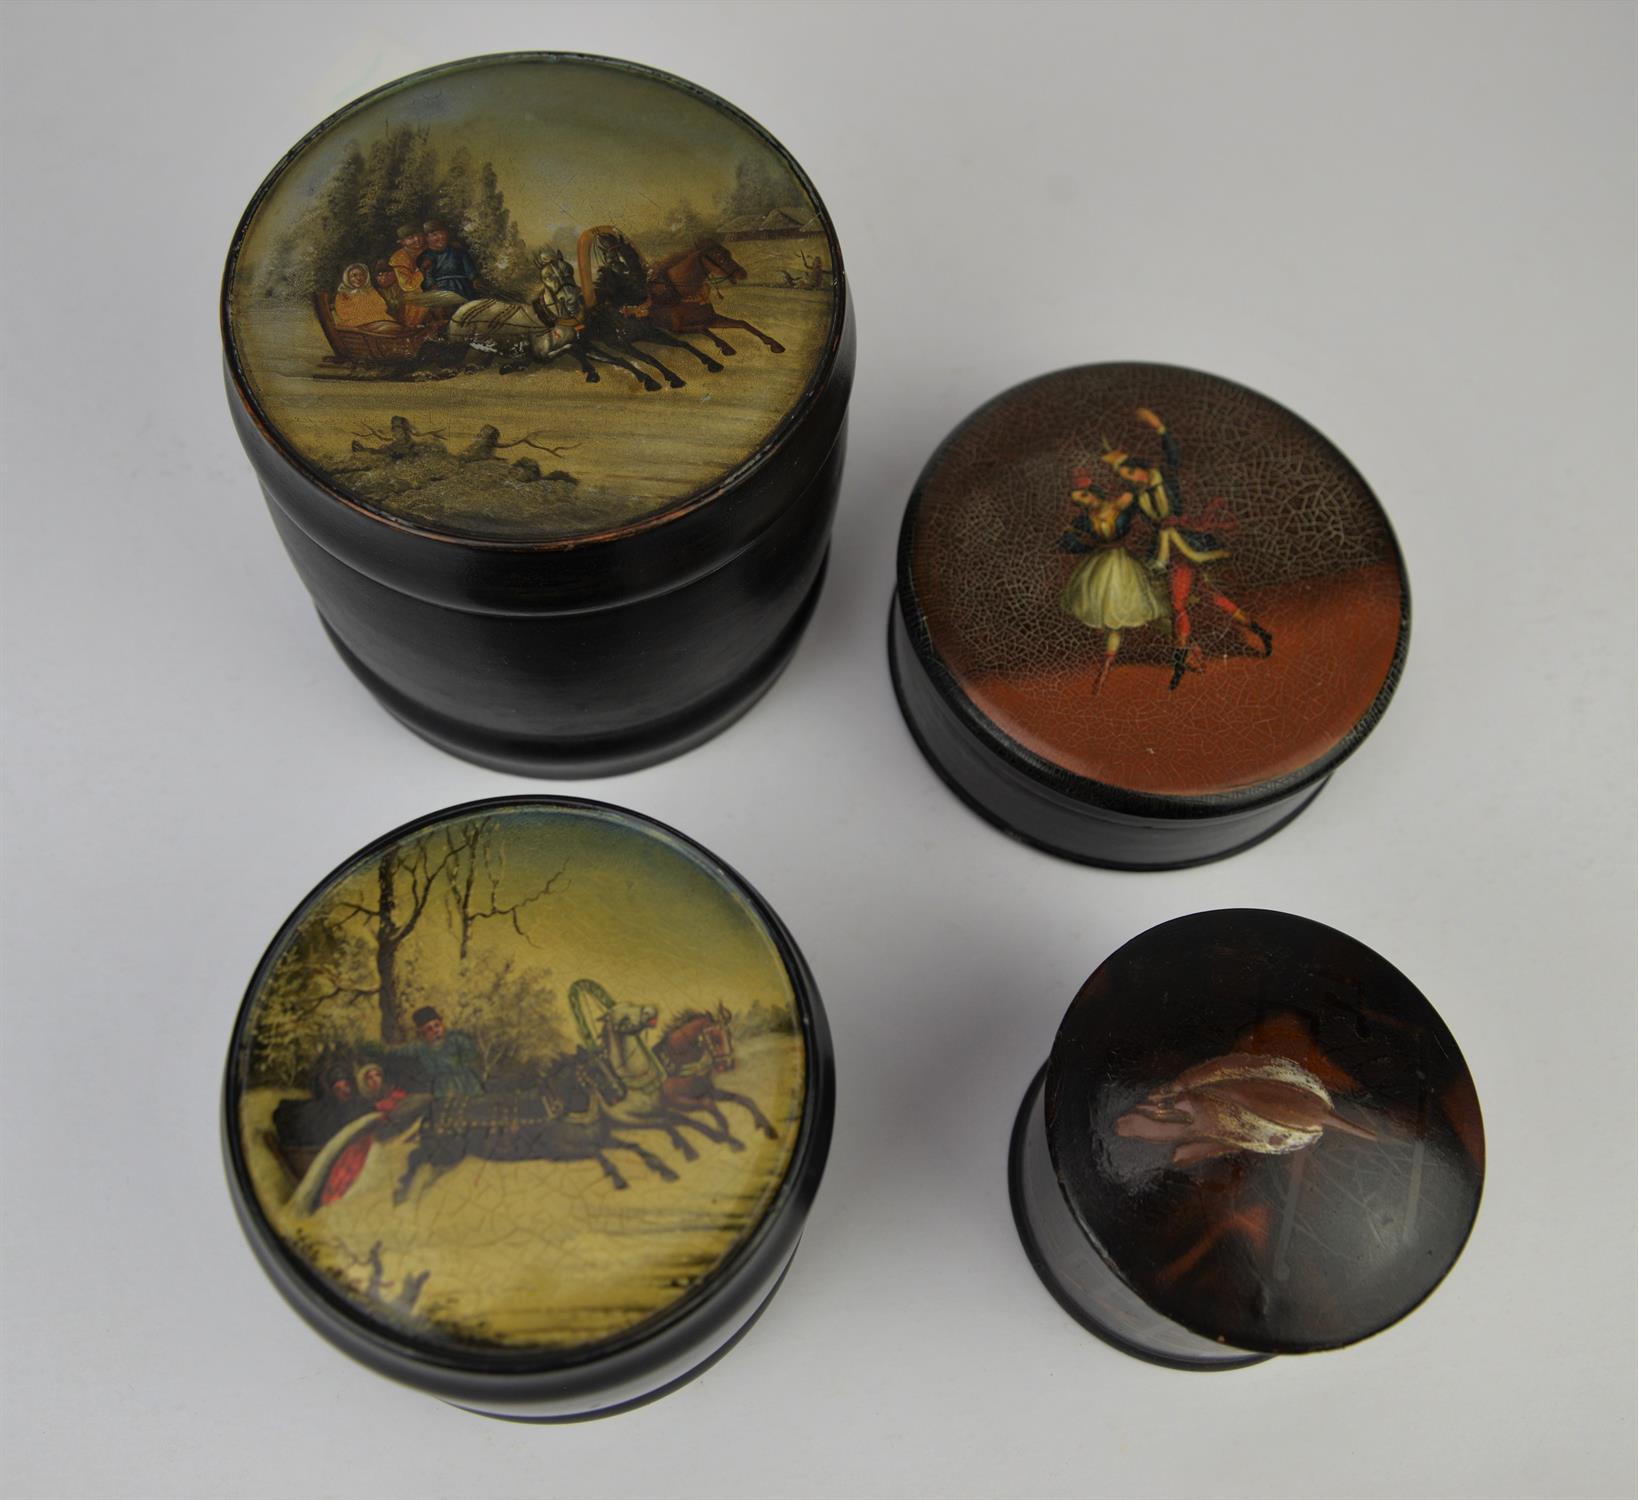 Collection of seven Russian papier-mache boxes, late 19th/early 20th century, depicting various - Image 2 of 3